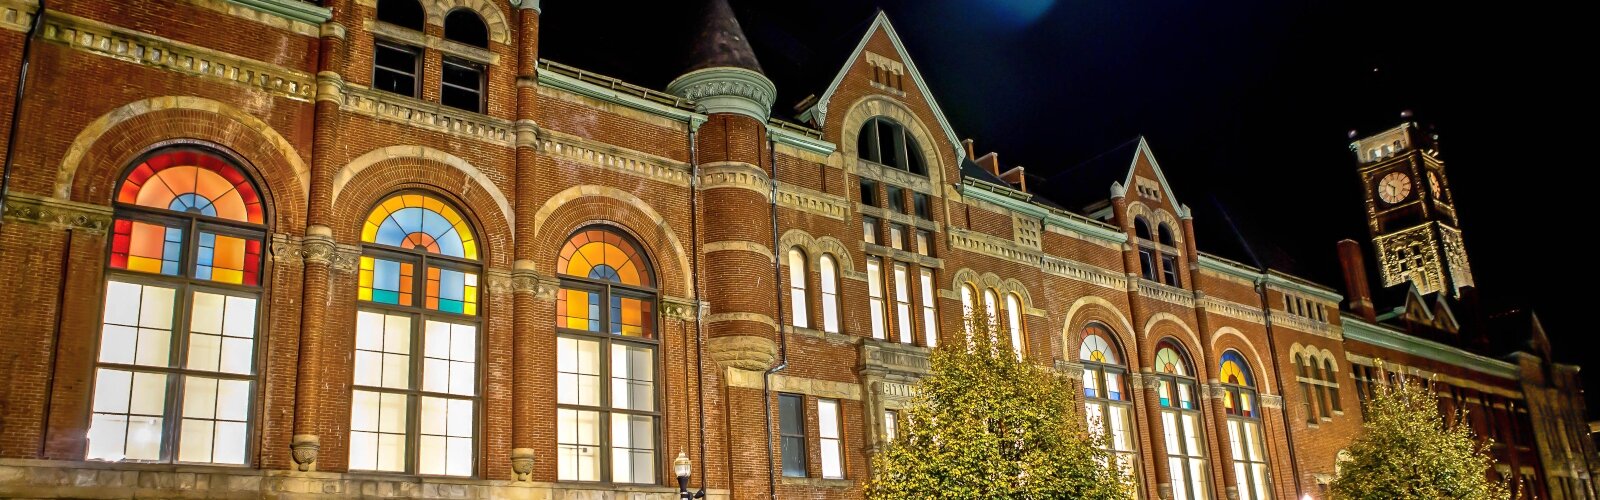 The Clark County Heritage Center is aglow at night, highlighting some of the stained glass arched windows.